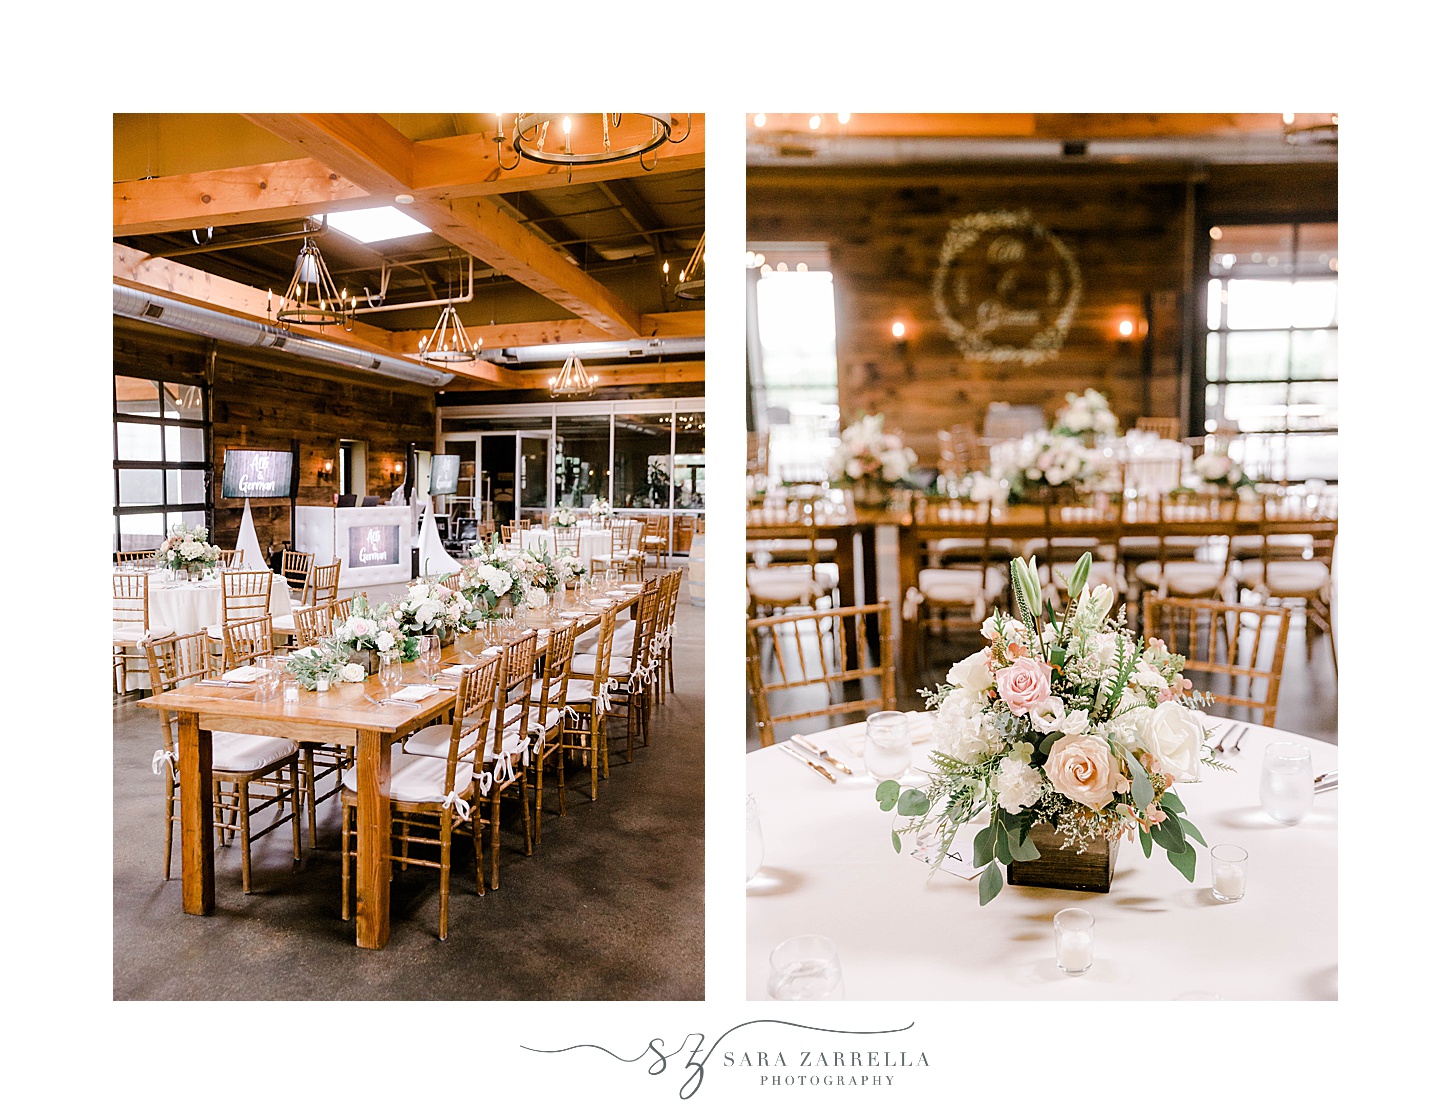 long wooden table with floral centerpieces for rustic reception at Newport Vineyards